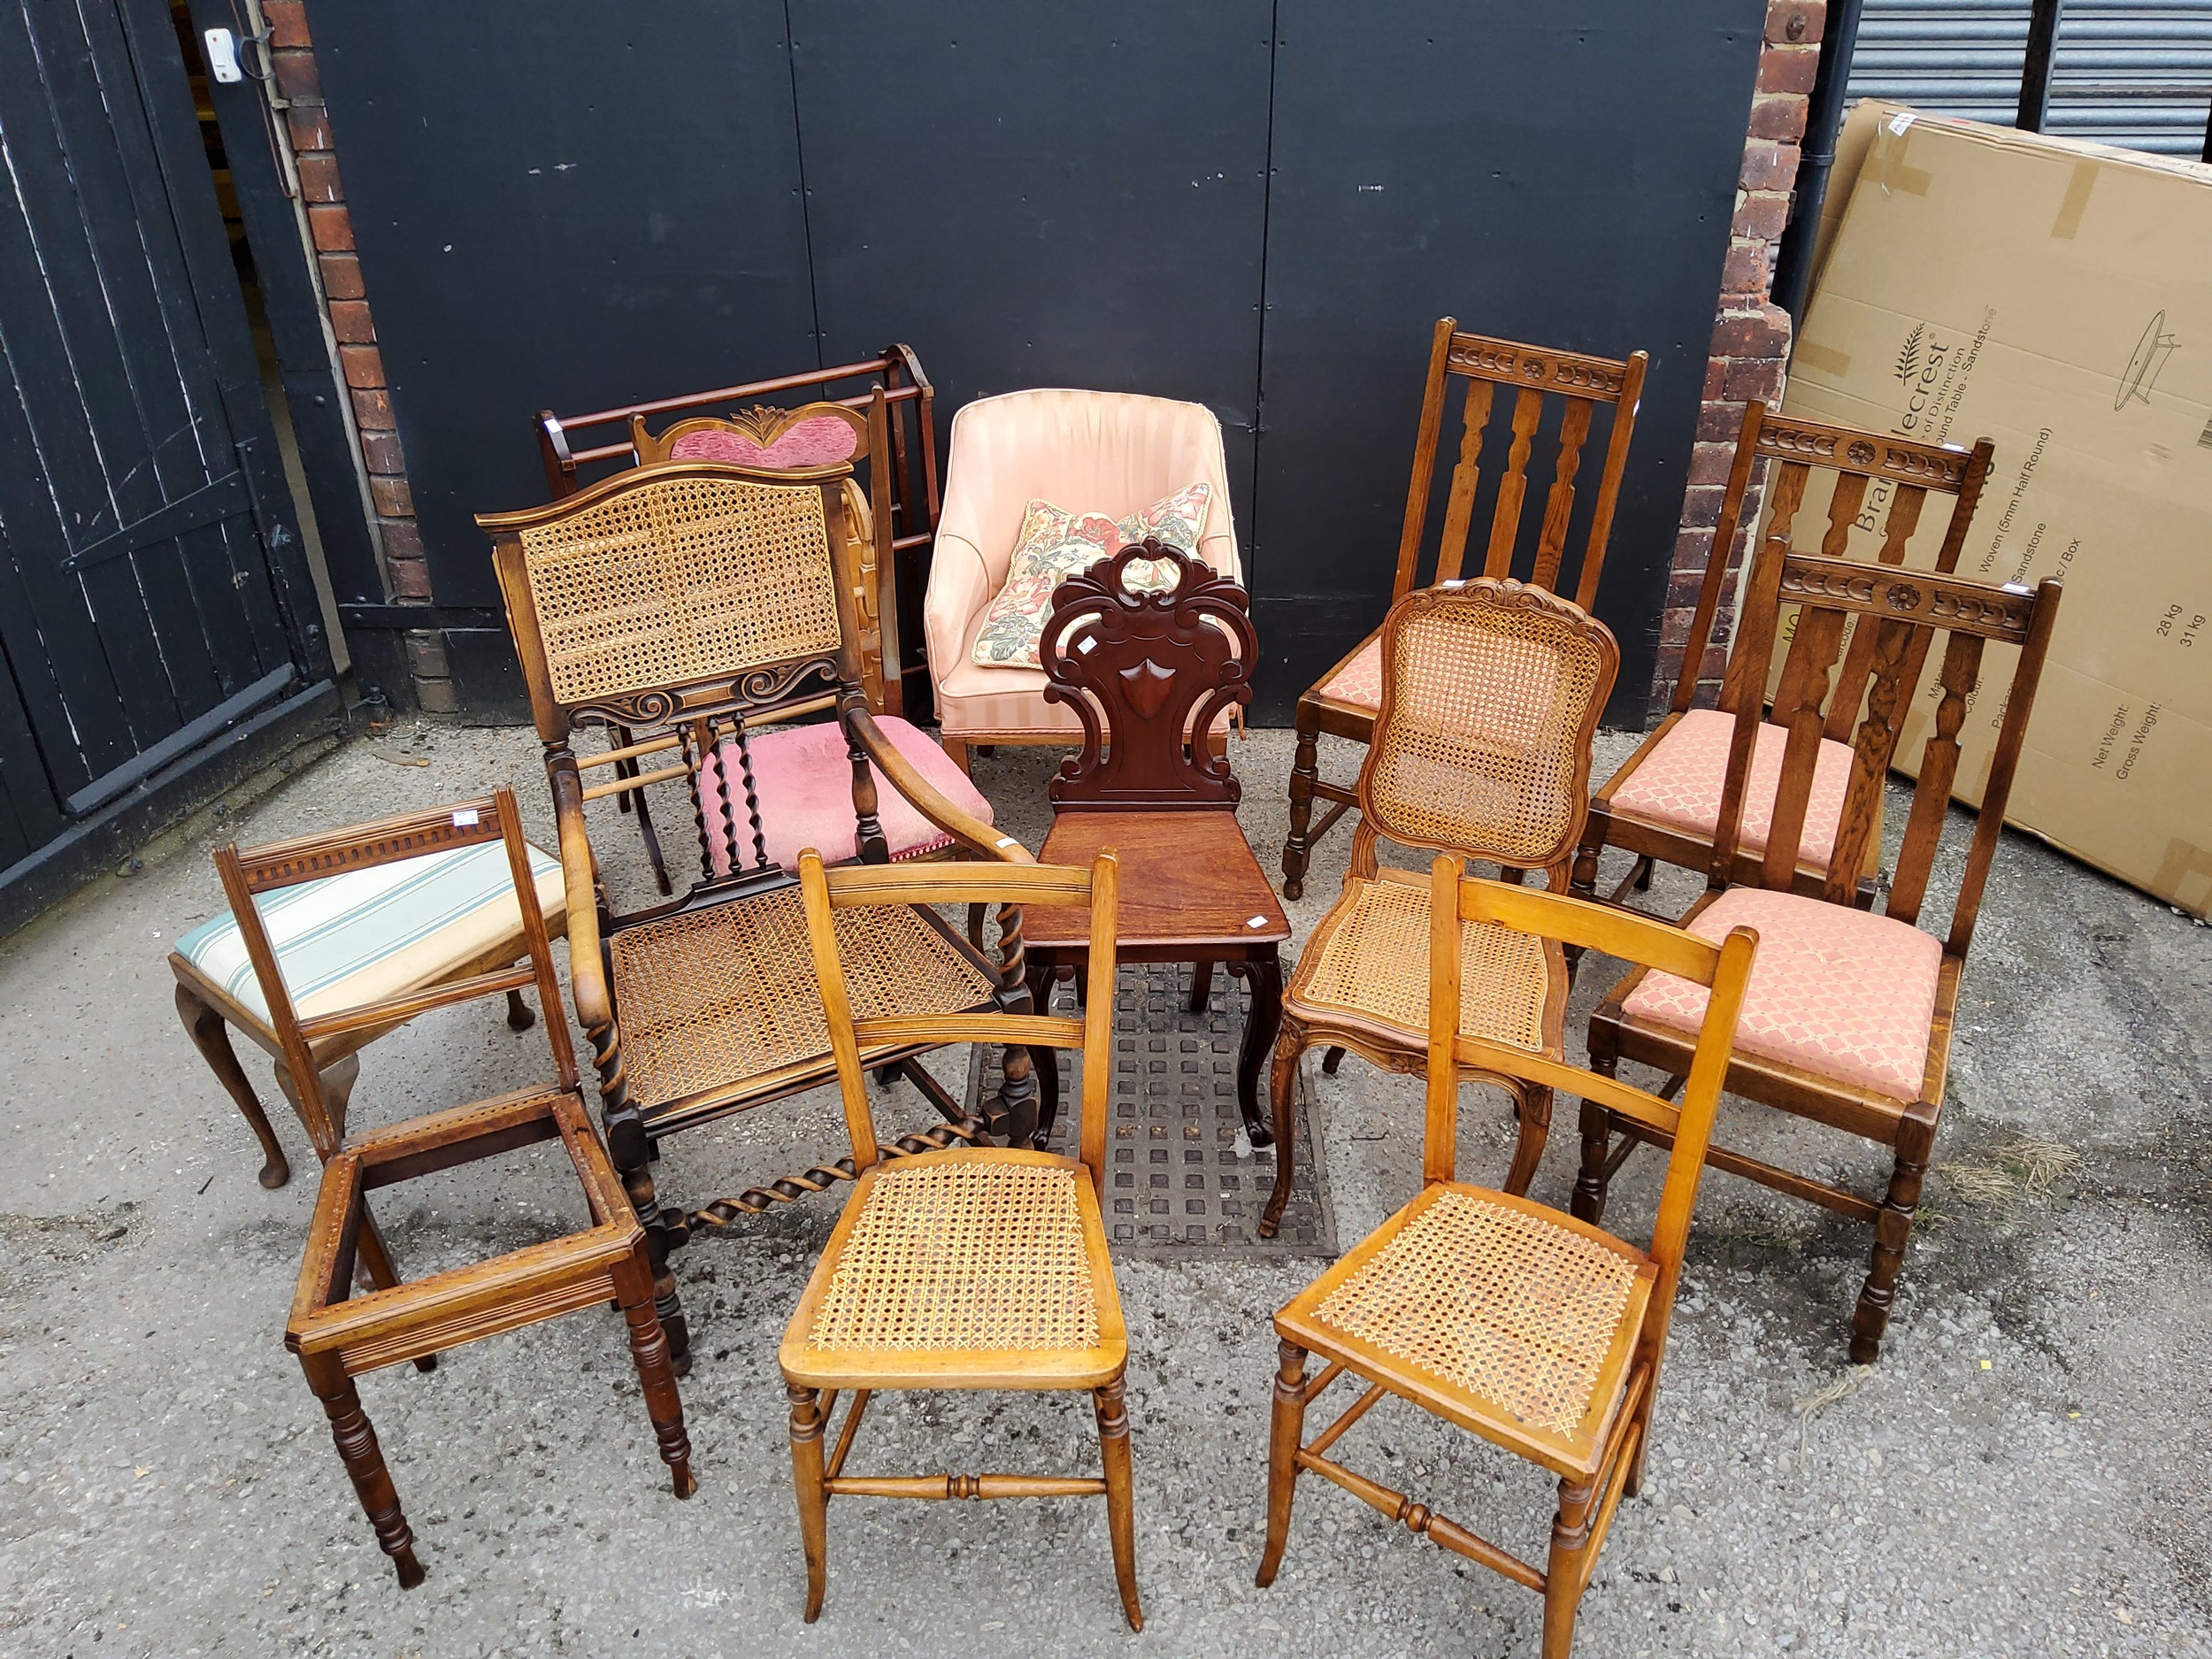 Harlequin set of chairs, footstool and towel racks, including a Victorian mahogany hall chair, - Image 4 of 4